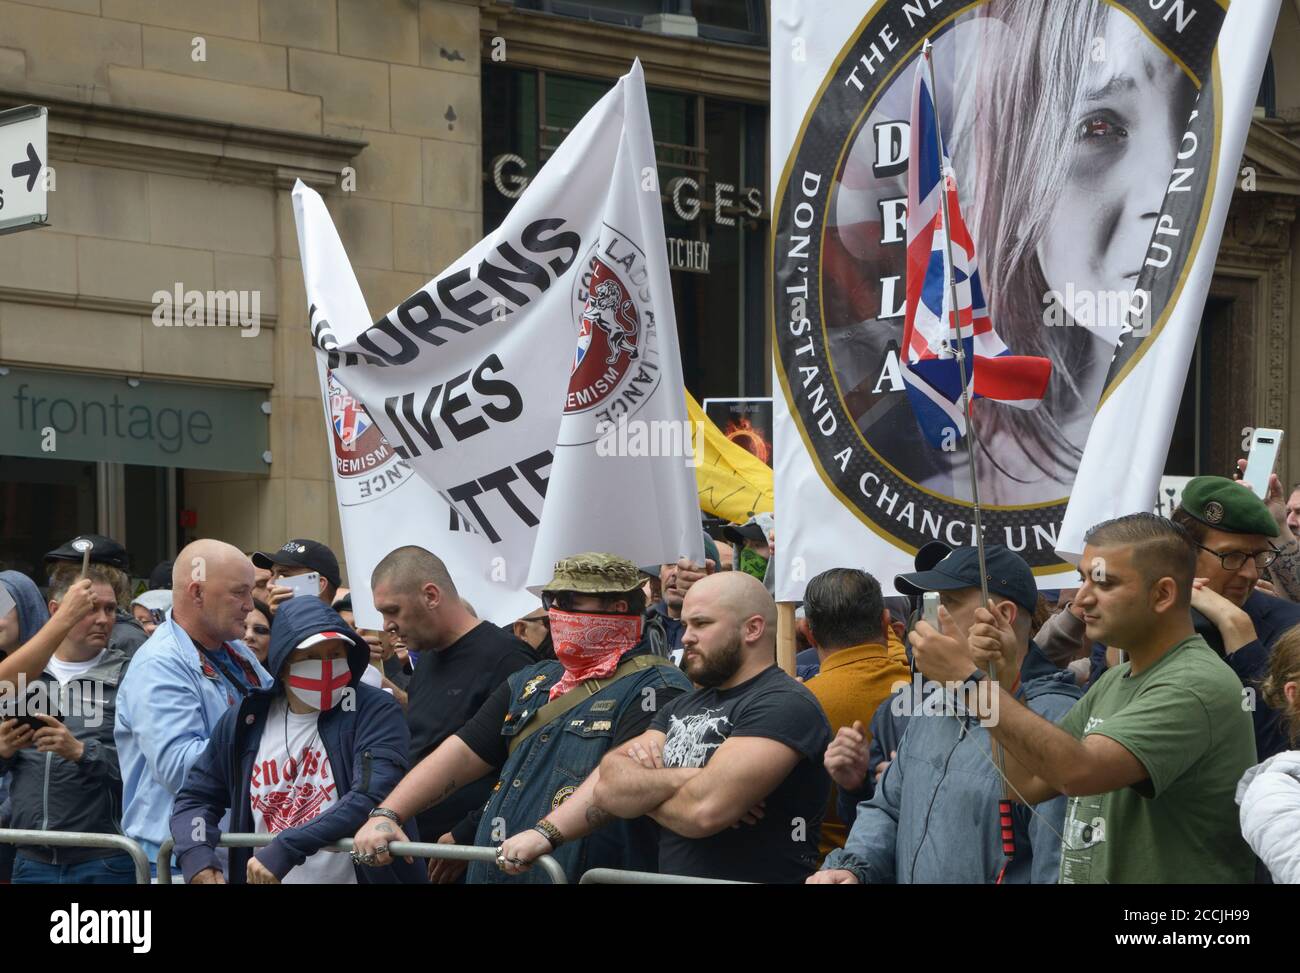 Right wing anti-pedophile protesters with banners, in Nottingham. Stock Photo